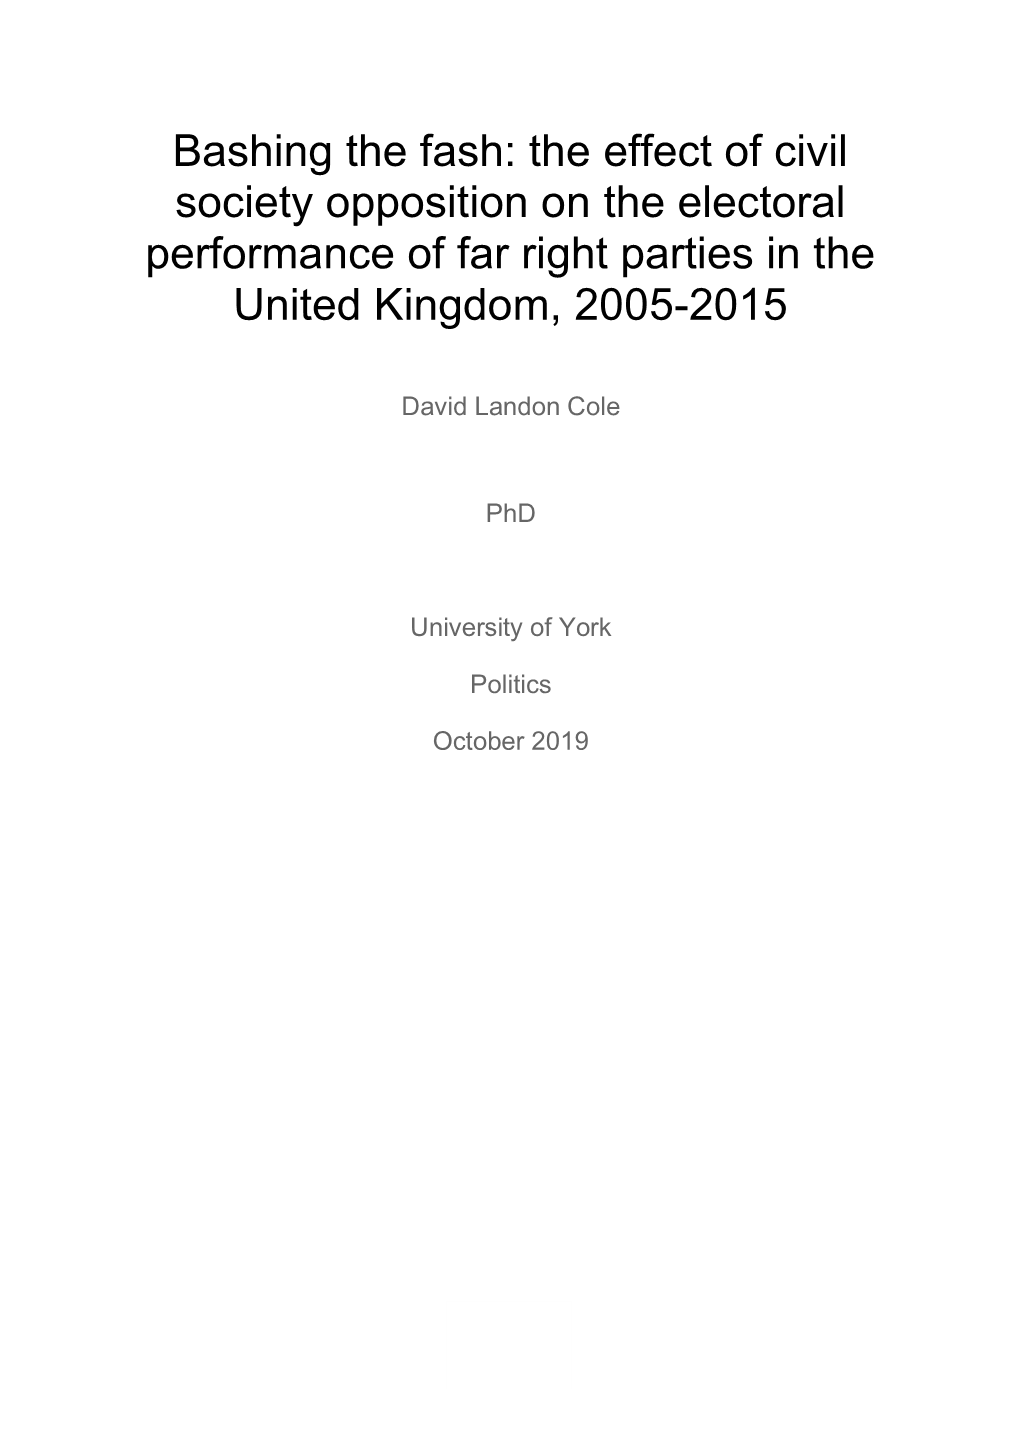 The Effect of Civil Society Opposition on the Electoral Performance of Far Right Parties in the United Kingdom, 2005-2015